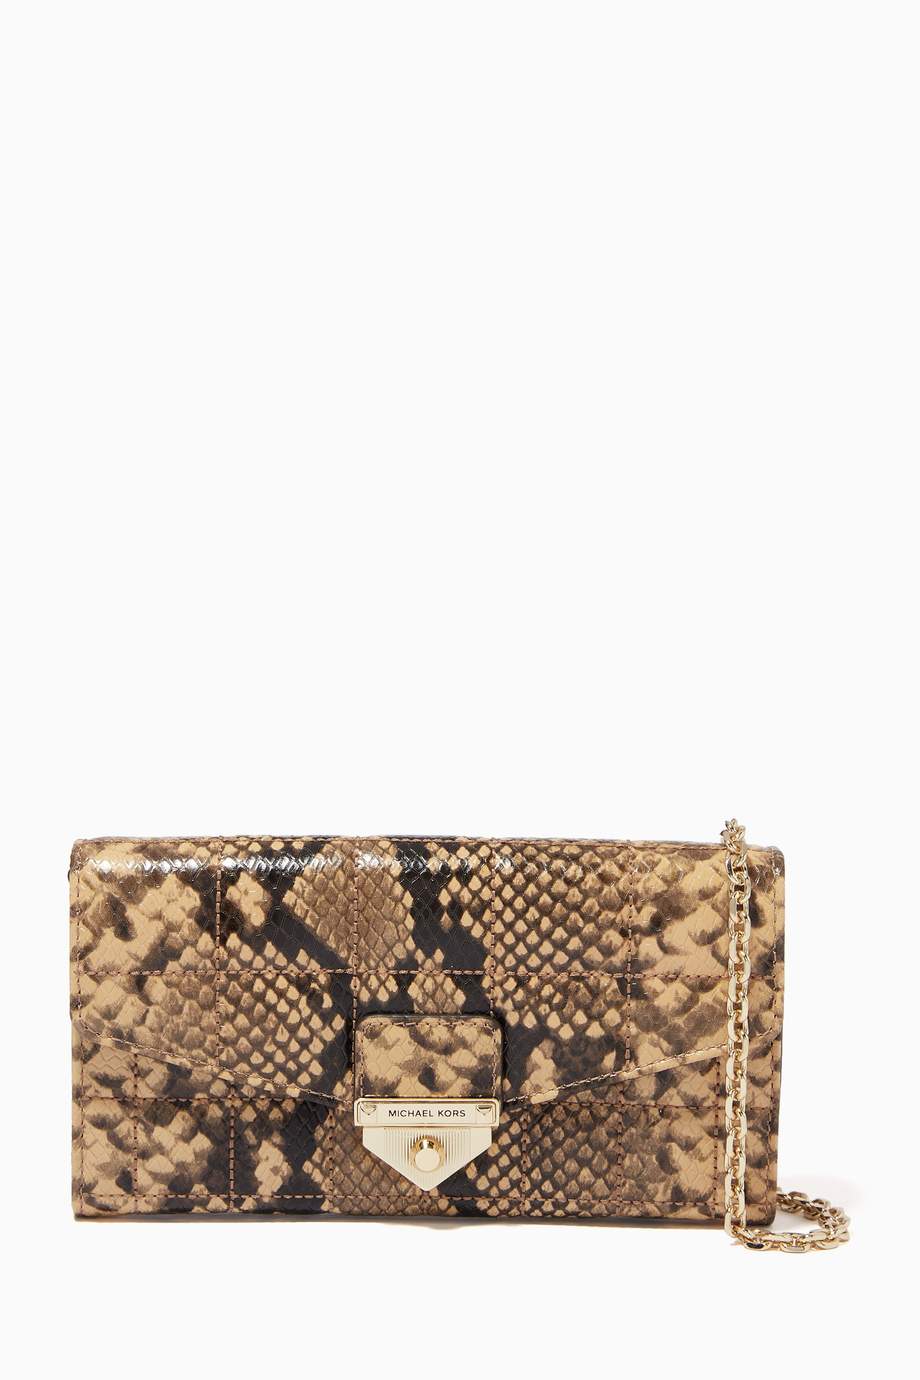 Shop Michael Kors Brown Soho Chain Wallet in Python Embossed Leather for Women | Ounass UAE